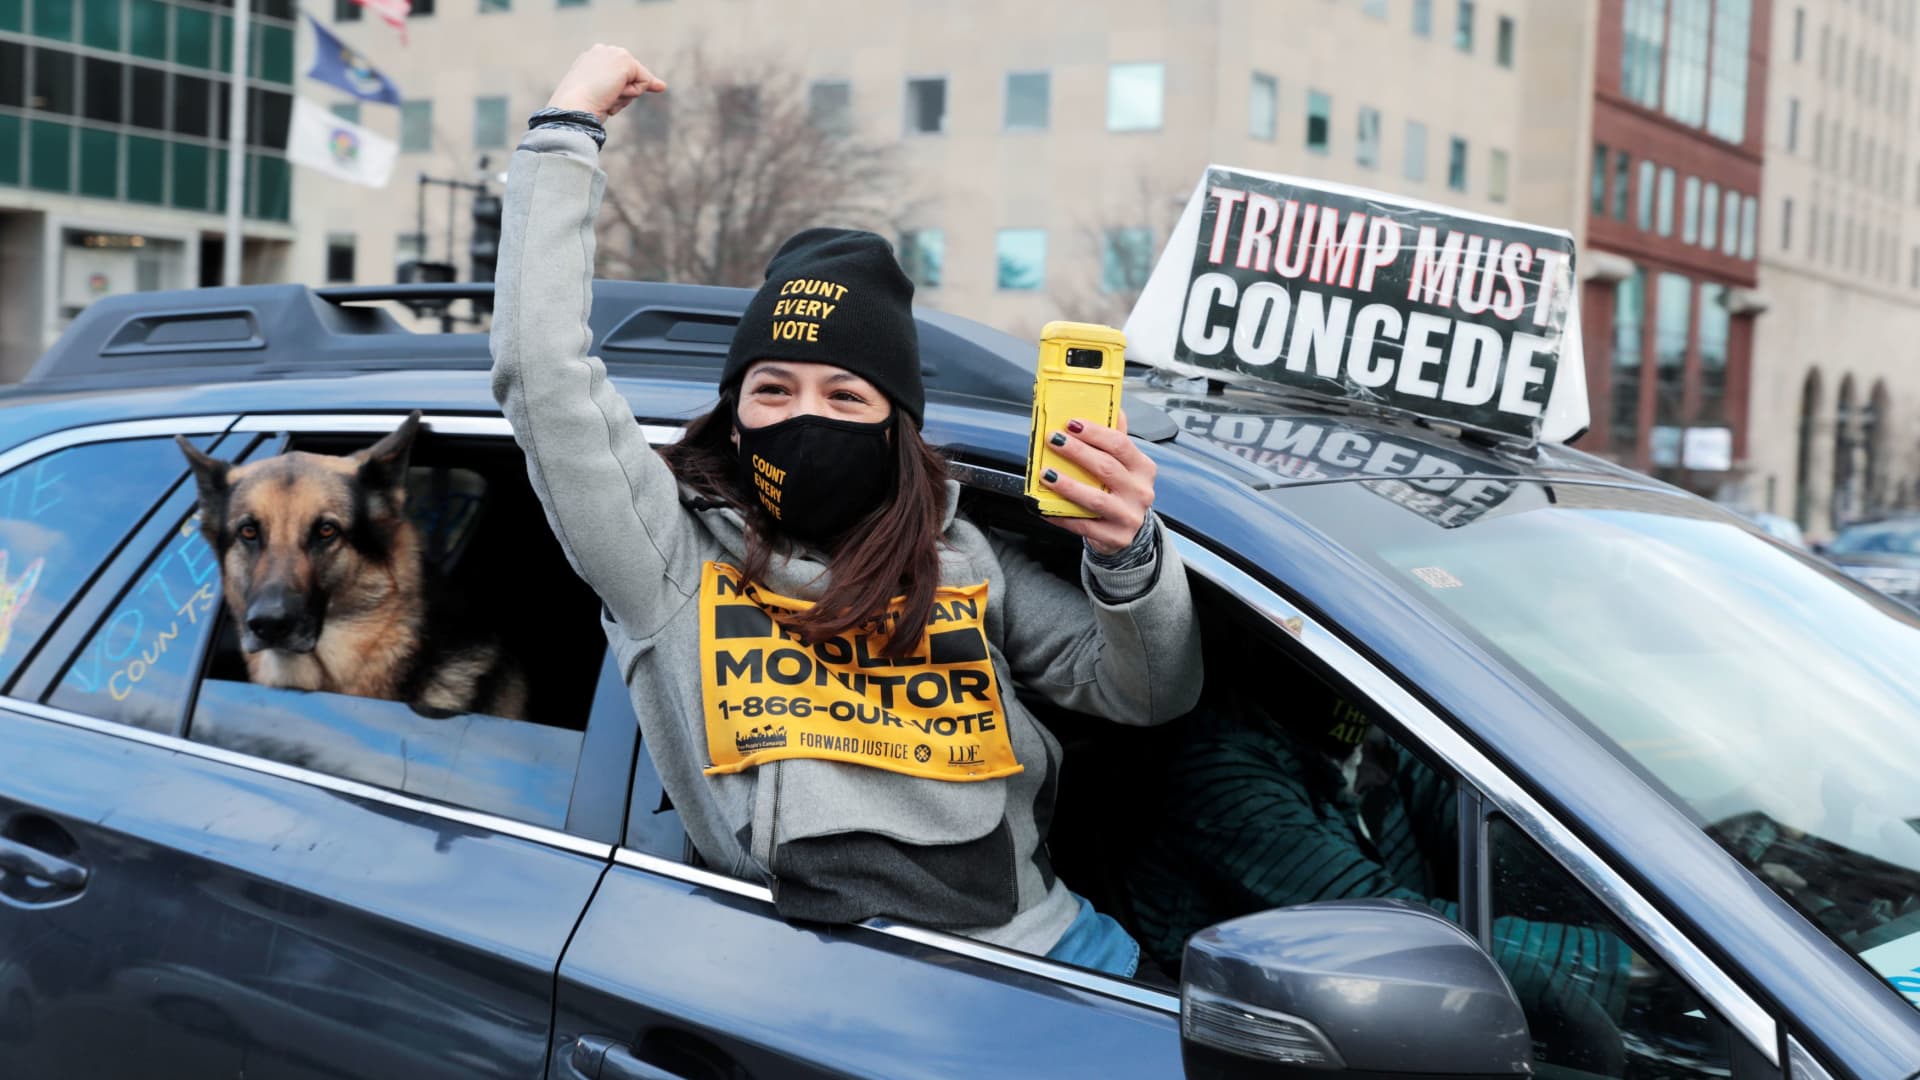 Demonstrators in a car caravan demand the Board of State Canvassers to certify the results of the election in Lansing, Michigan, November 23, 2020.